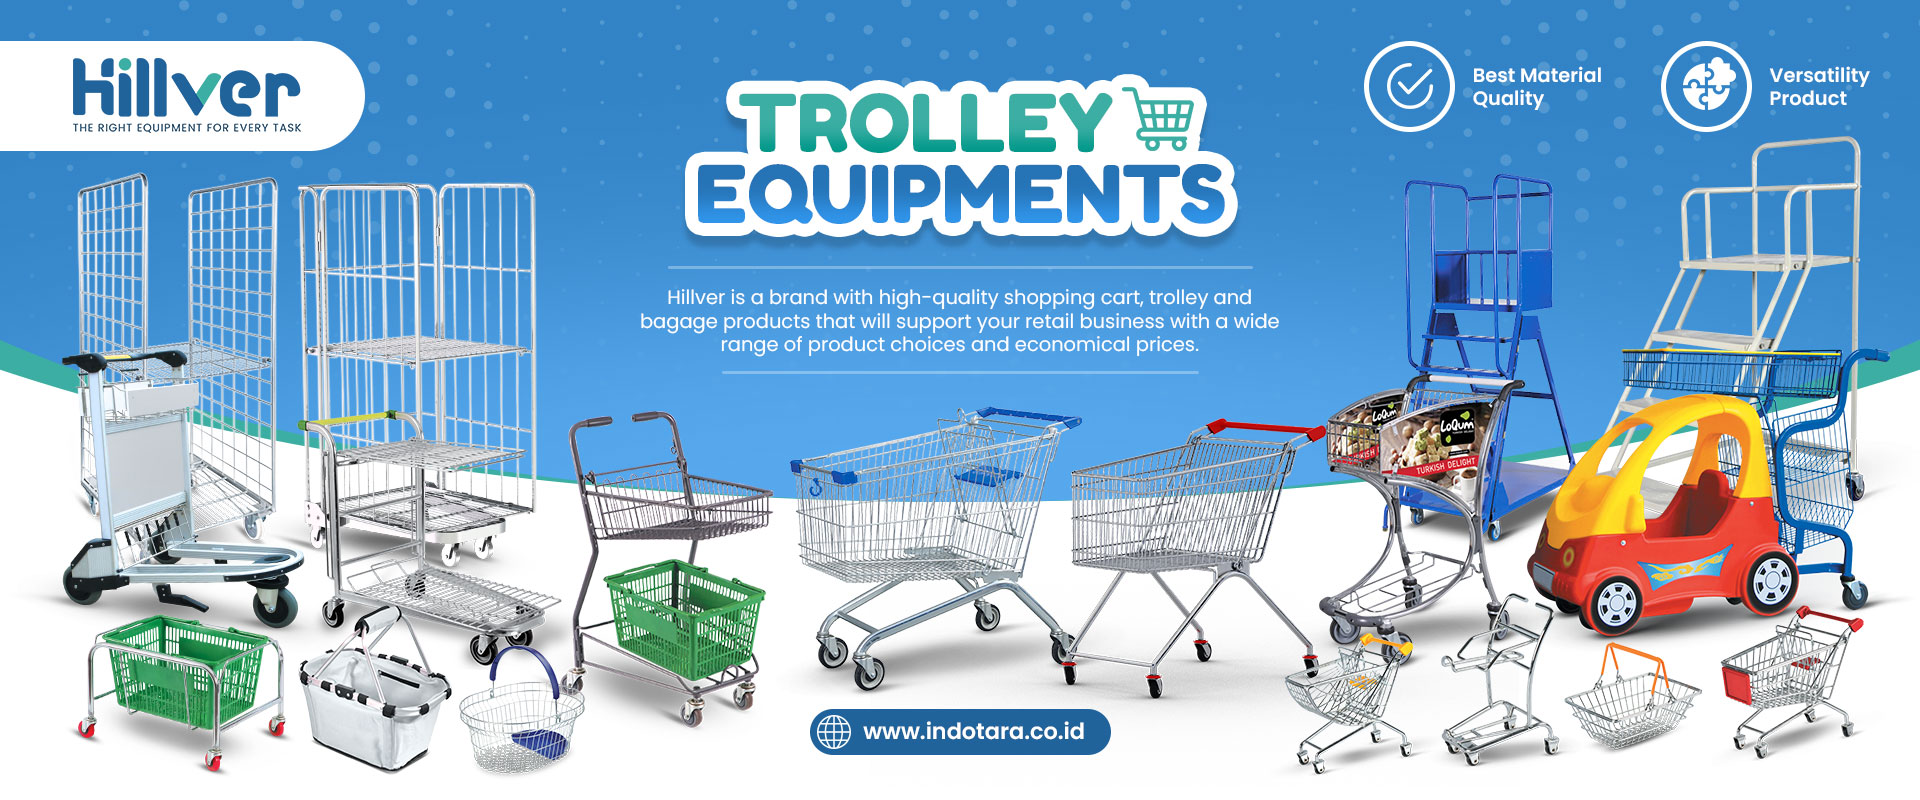 Hillver Shopping Trolley Equipments